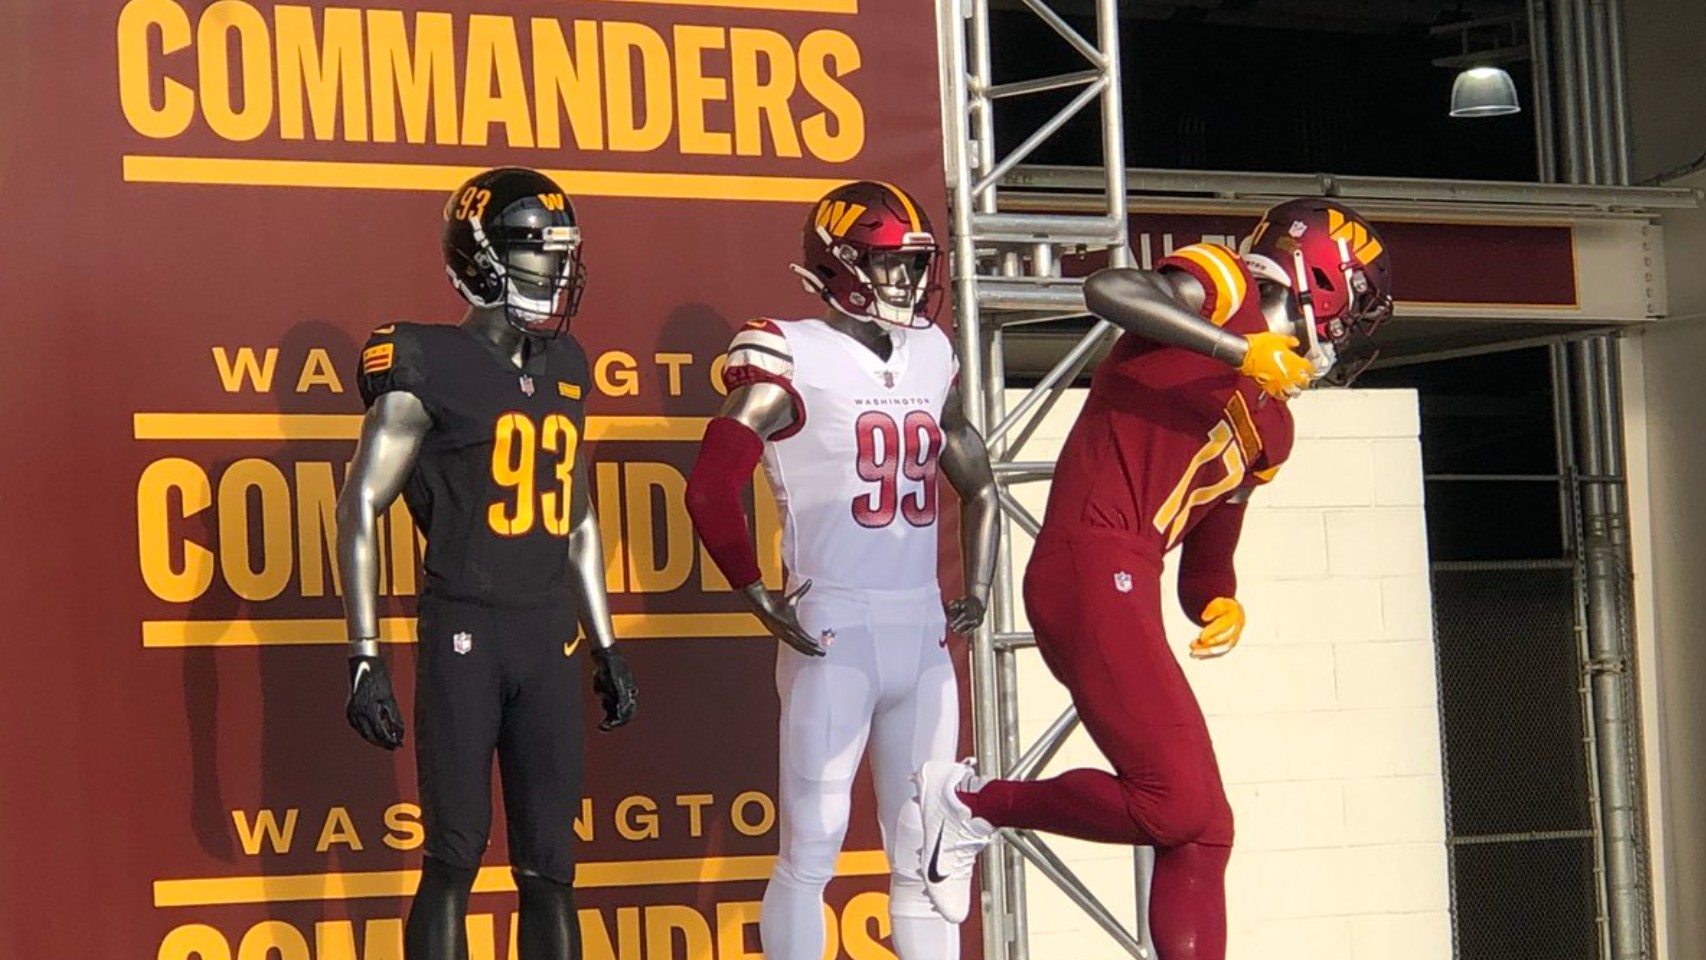 8 Football Teams Will Have New Uniforms This Year: Here Are The